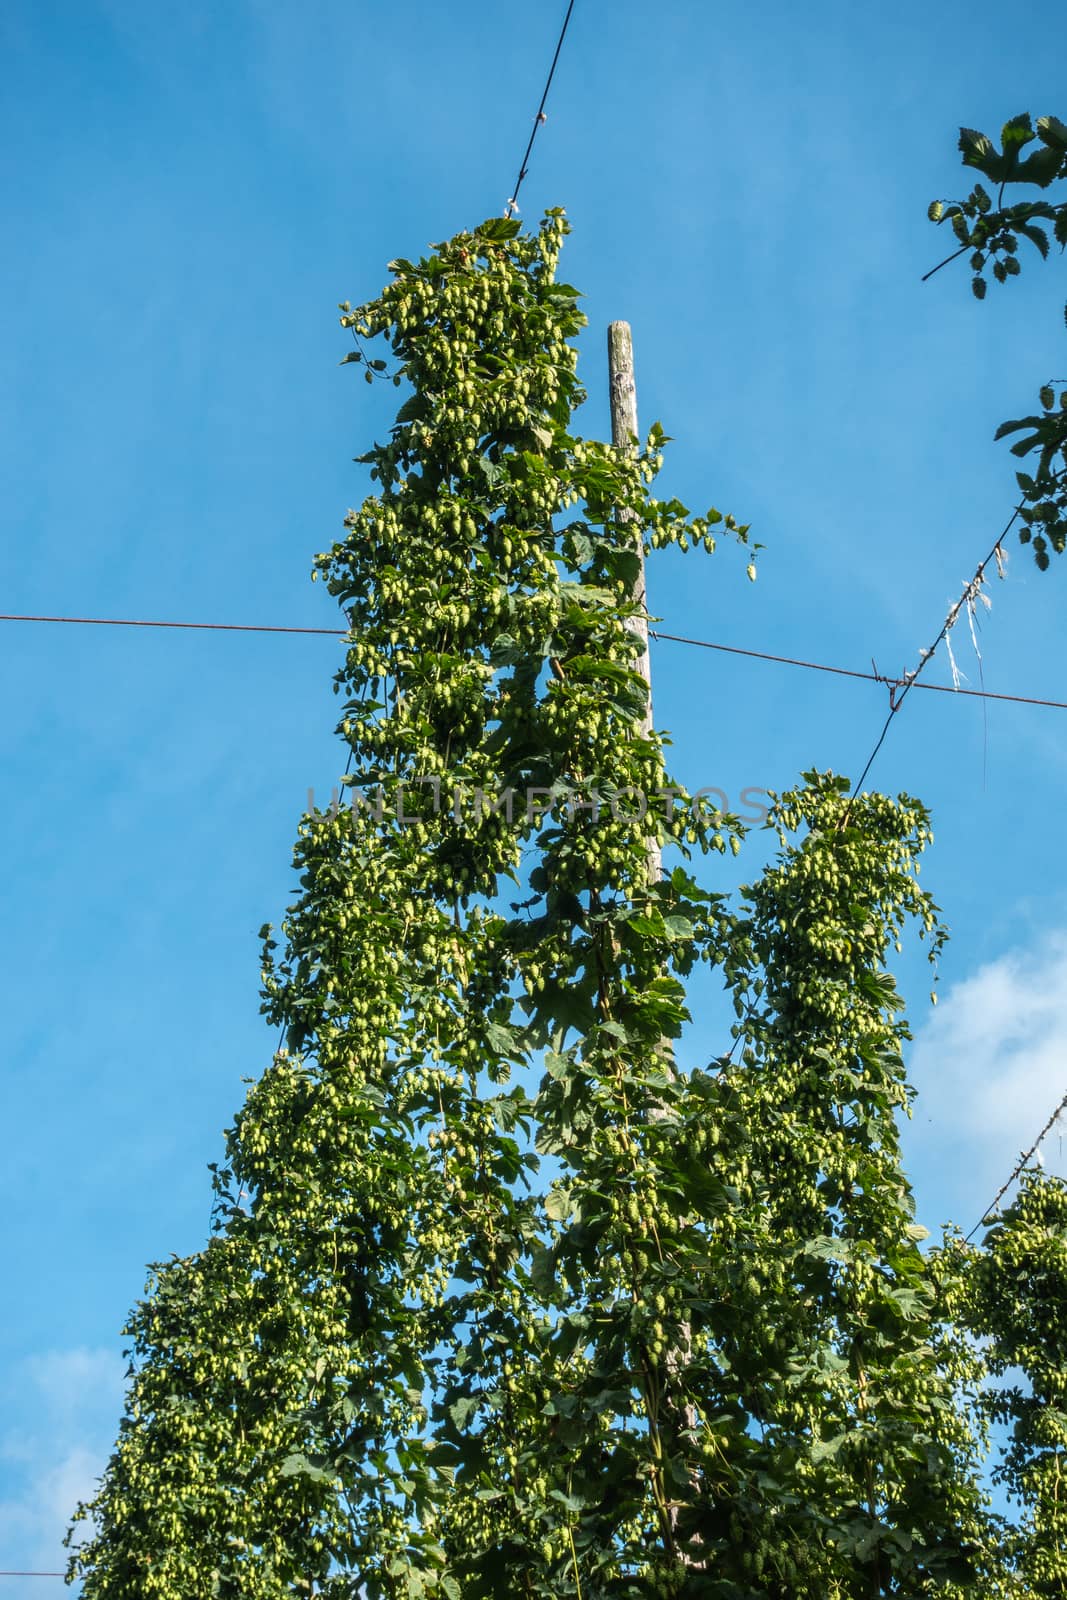 Proven, Flanders, Belgium - September 15, 2018: Closeup of top of hops plants with plenty of cones harvest ready on the field under blue sky. Suspension lines visibles.